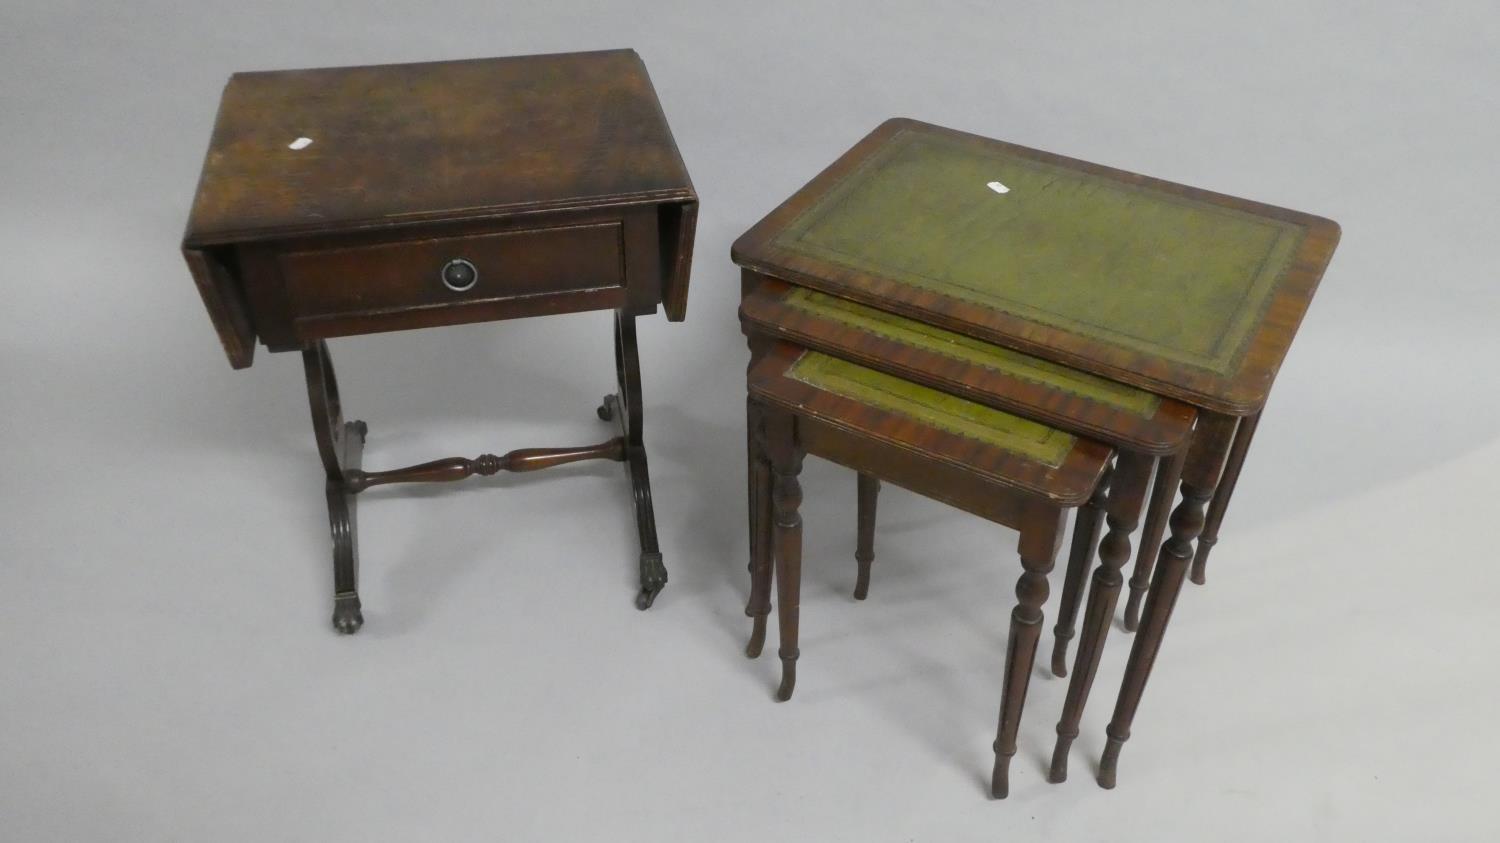 A Small Drop Leaf Mahogany Lyre Based Table and a Nest of Three Tables